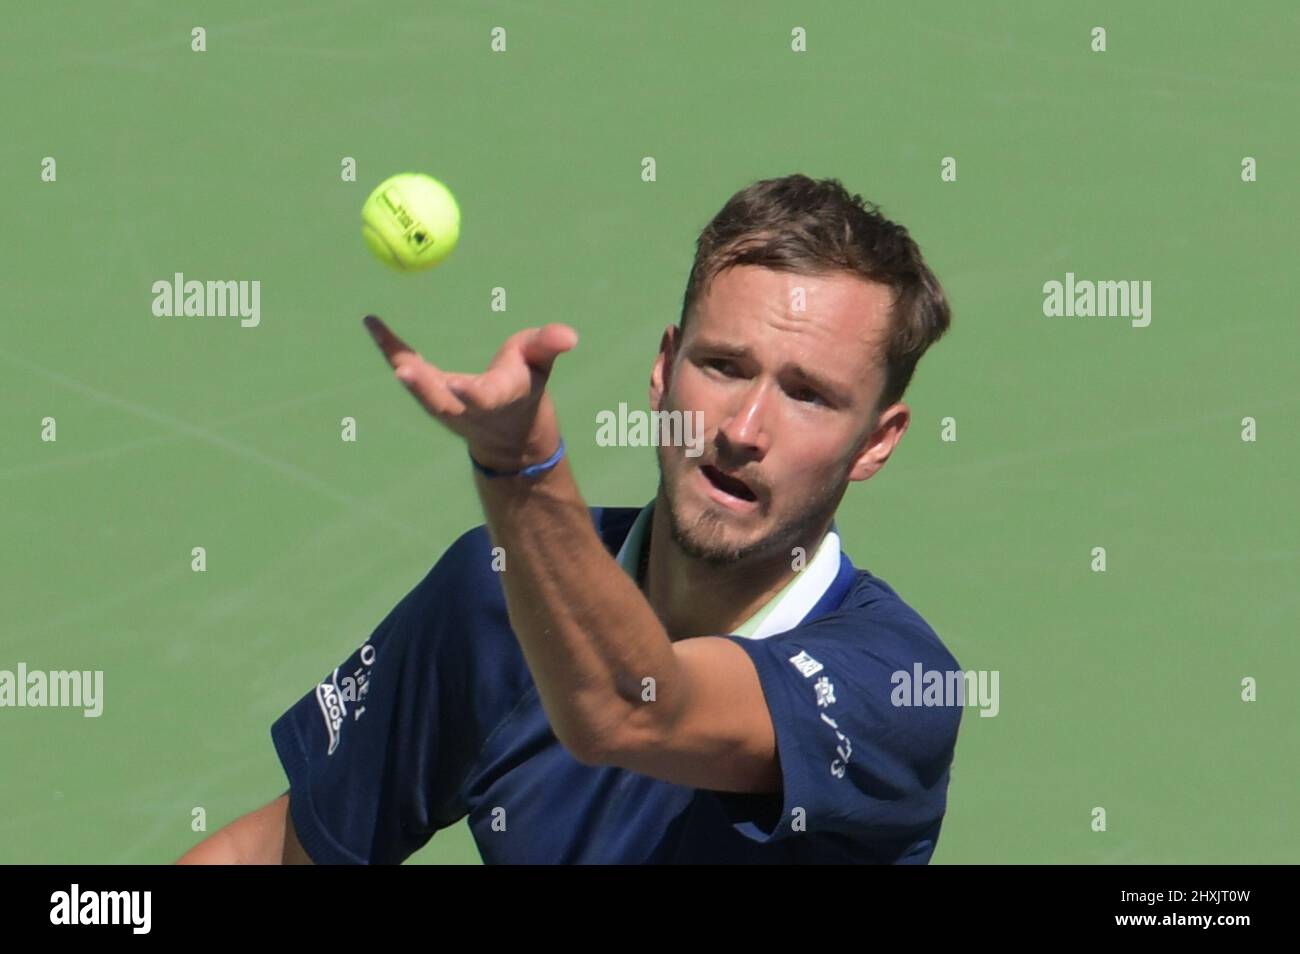 Daniil Medvedev (RUS) defeated Tomas Machac (CZE) 6-3, 6-2, at the BNP Paribas Open being played at Indian Wells Tennis Garden in Indian Wells, California on March 12, 2022: © Karla Kinne/Tennisclix/CSM Stock Photo